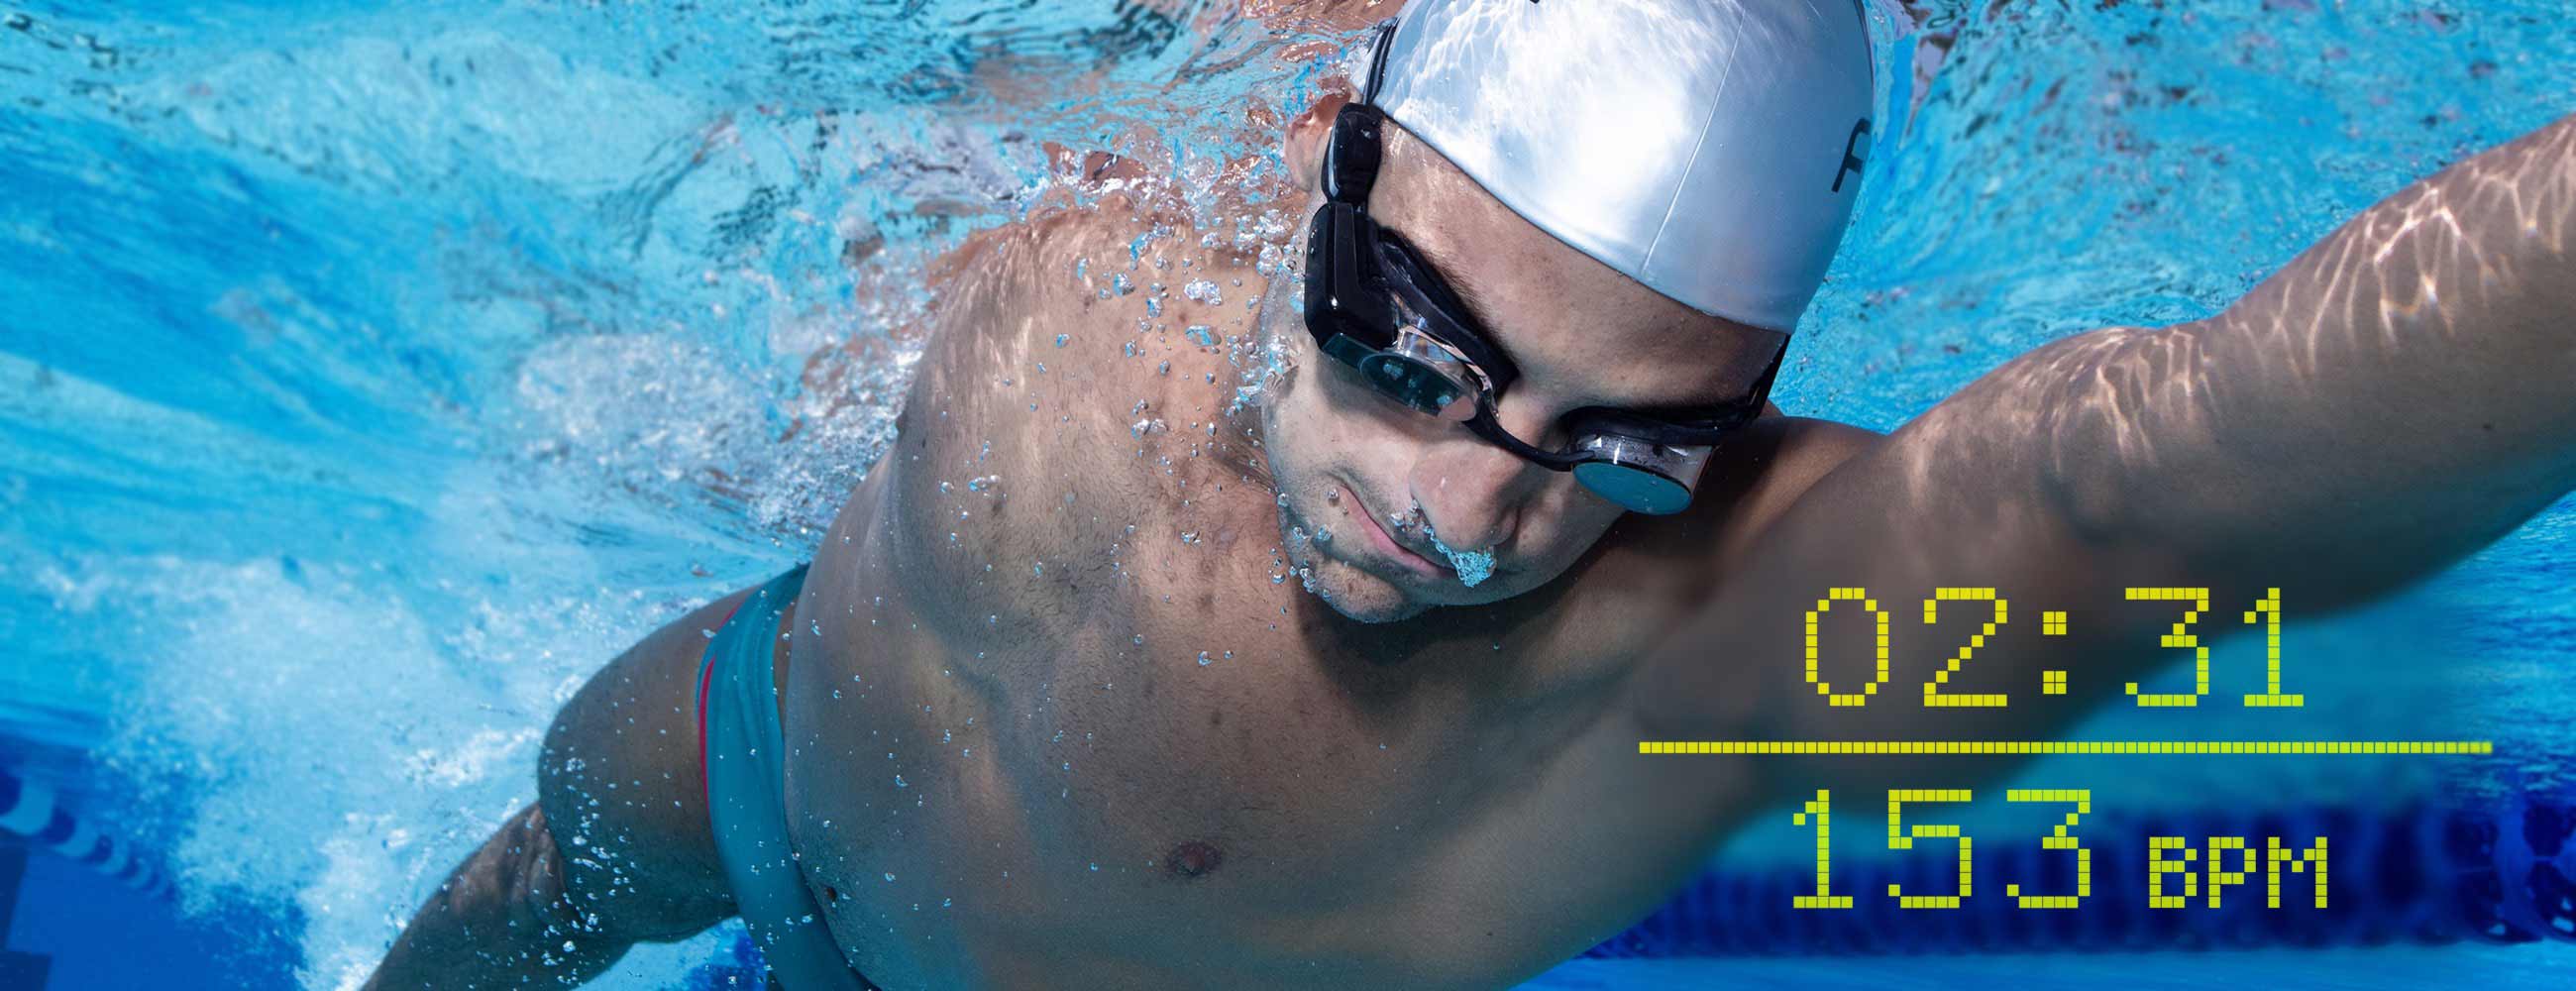 FORM Smart Swim Goggles Now Support Polar Heart Rate Monitors